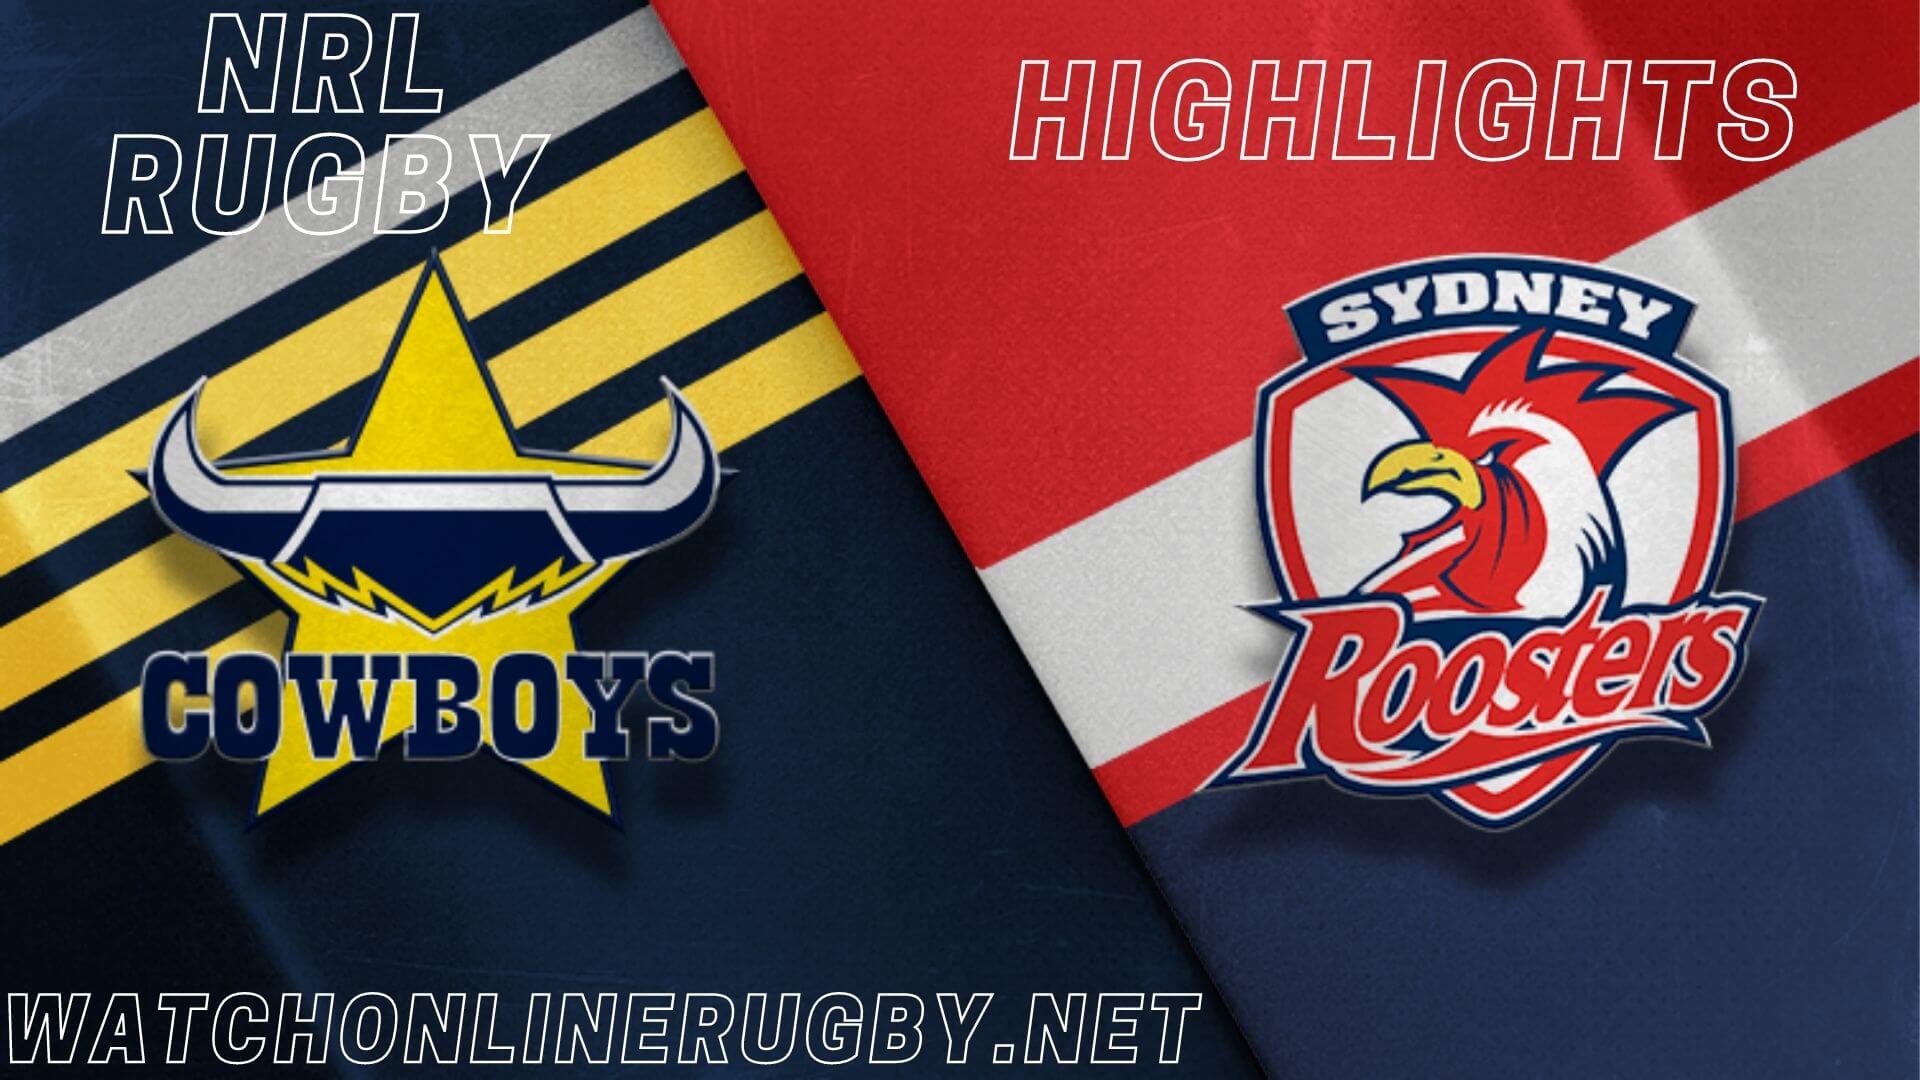 Cowboys Vs Roosters Highlights RD 4 NRL Rugby